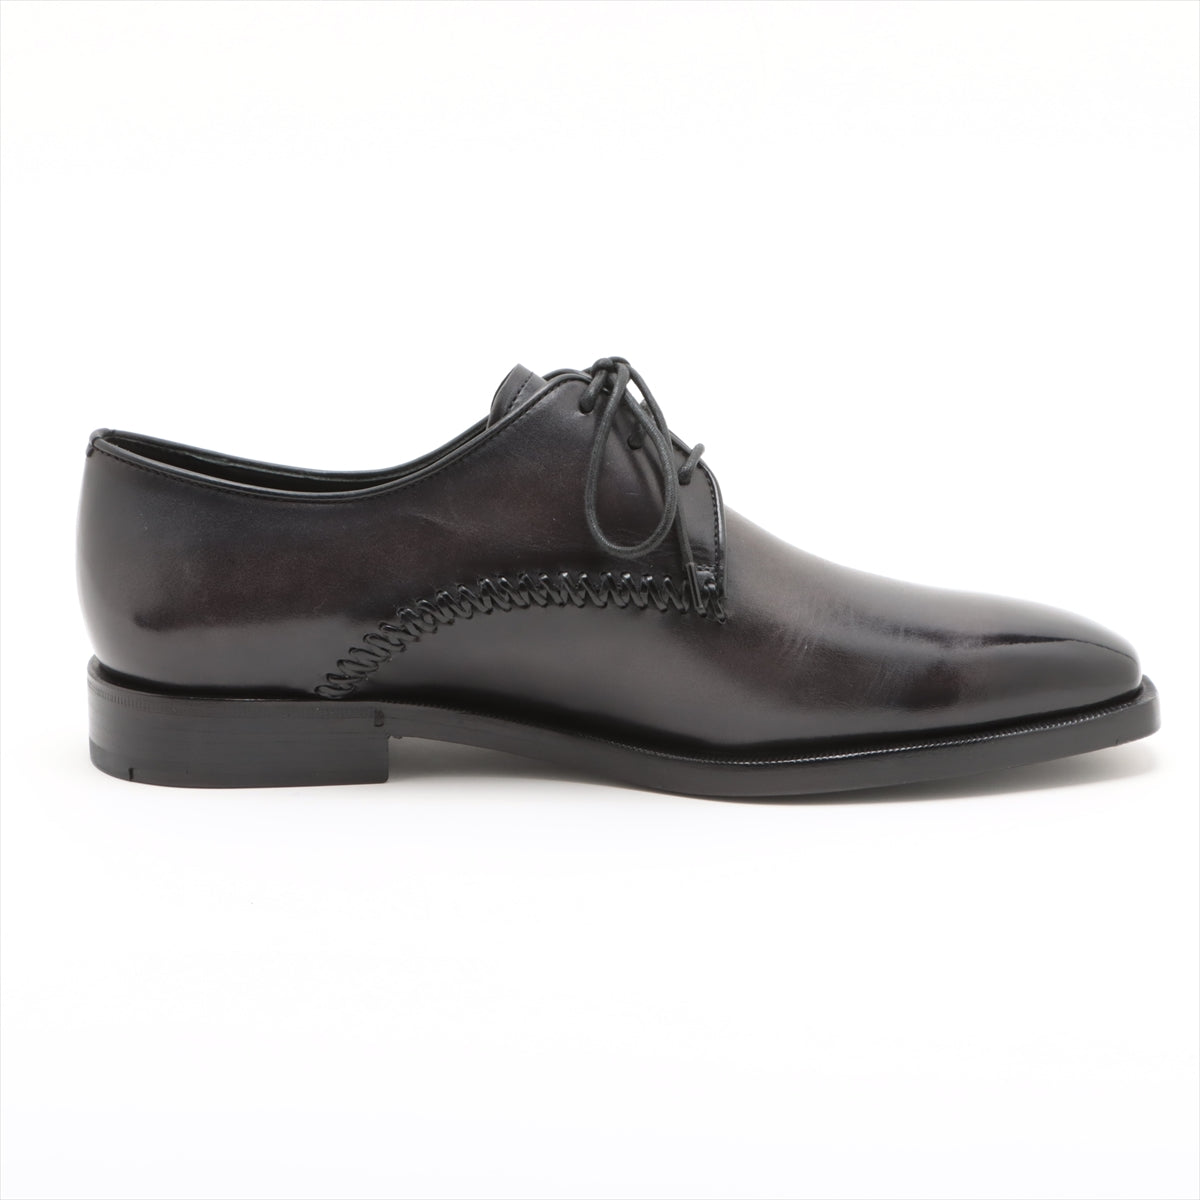 Berluti Leather Leather shoes 6 1/2 Men's Black Is there a replacement string Comes with genuine shoe tree